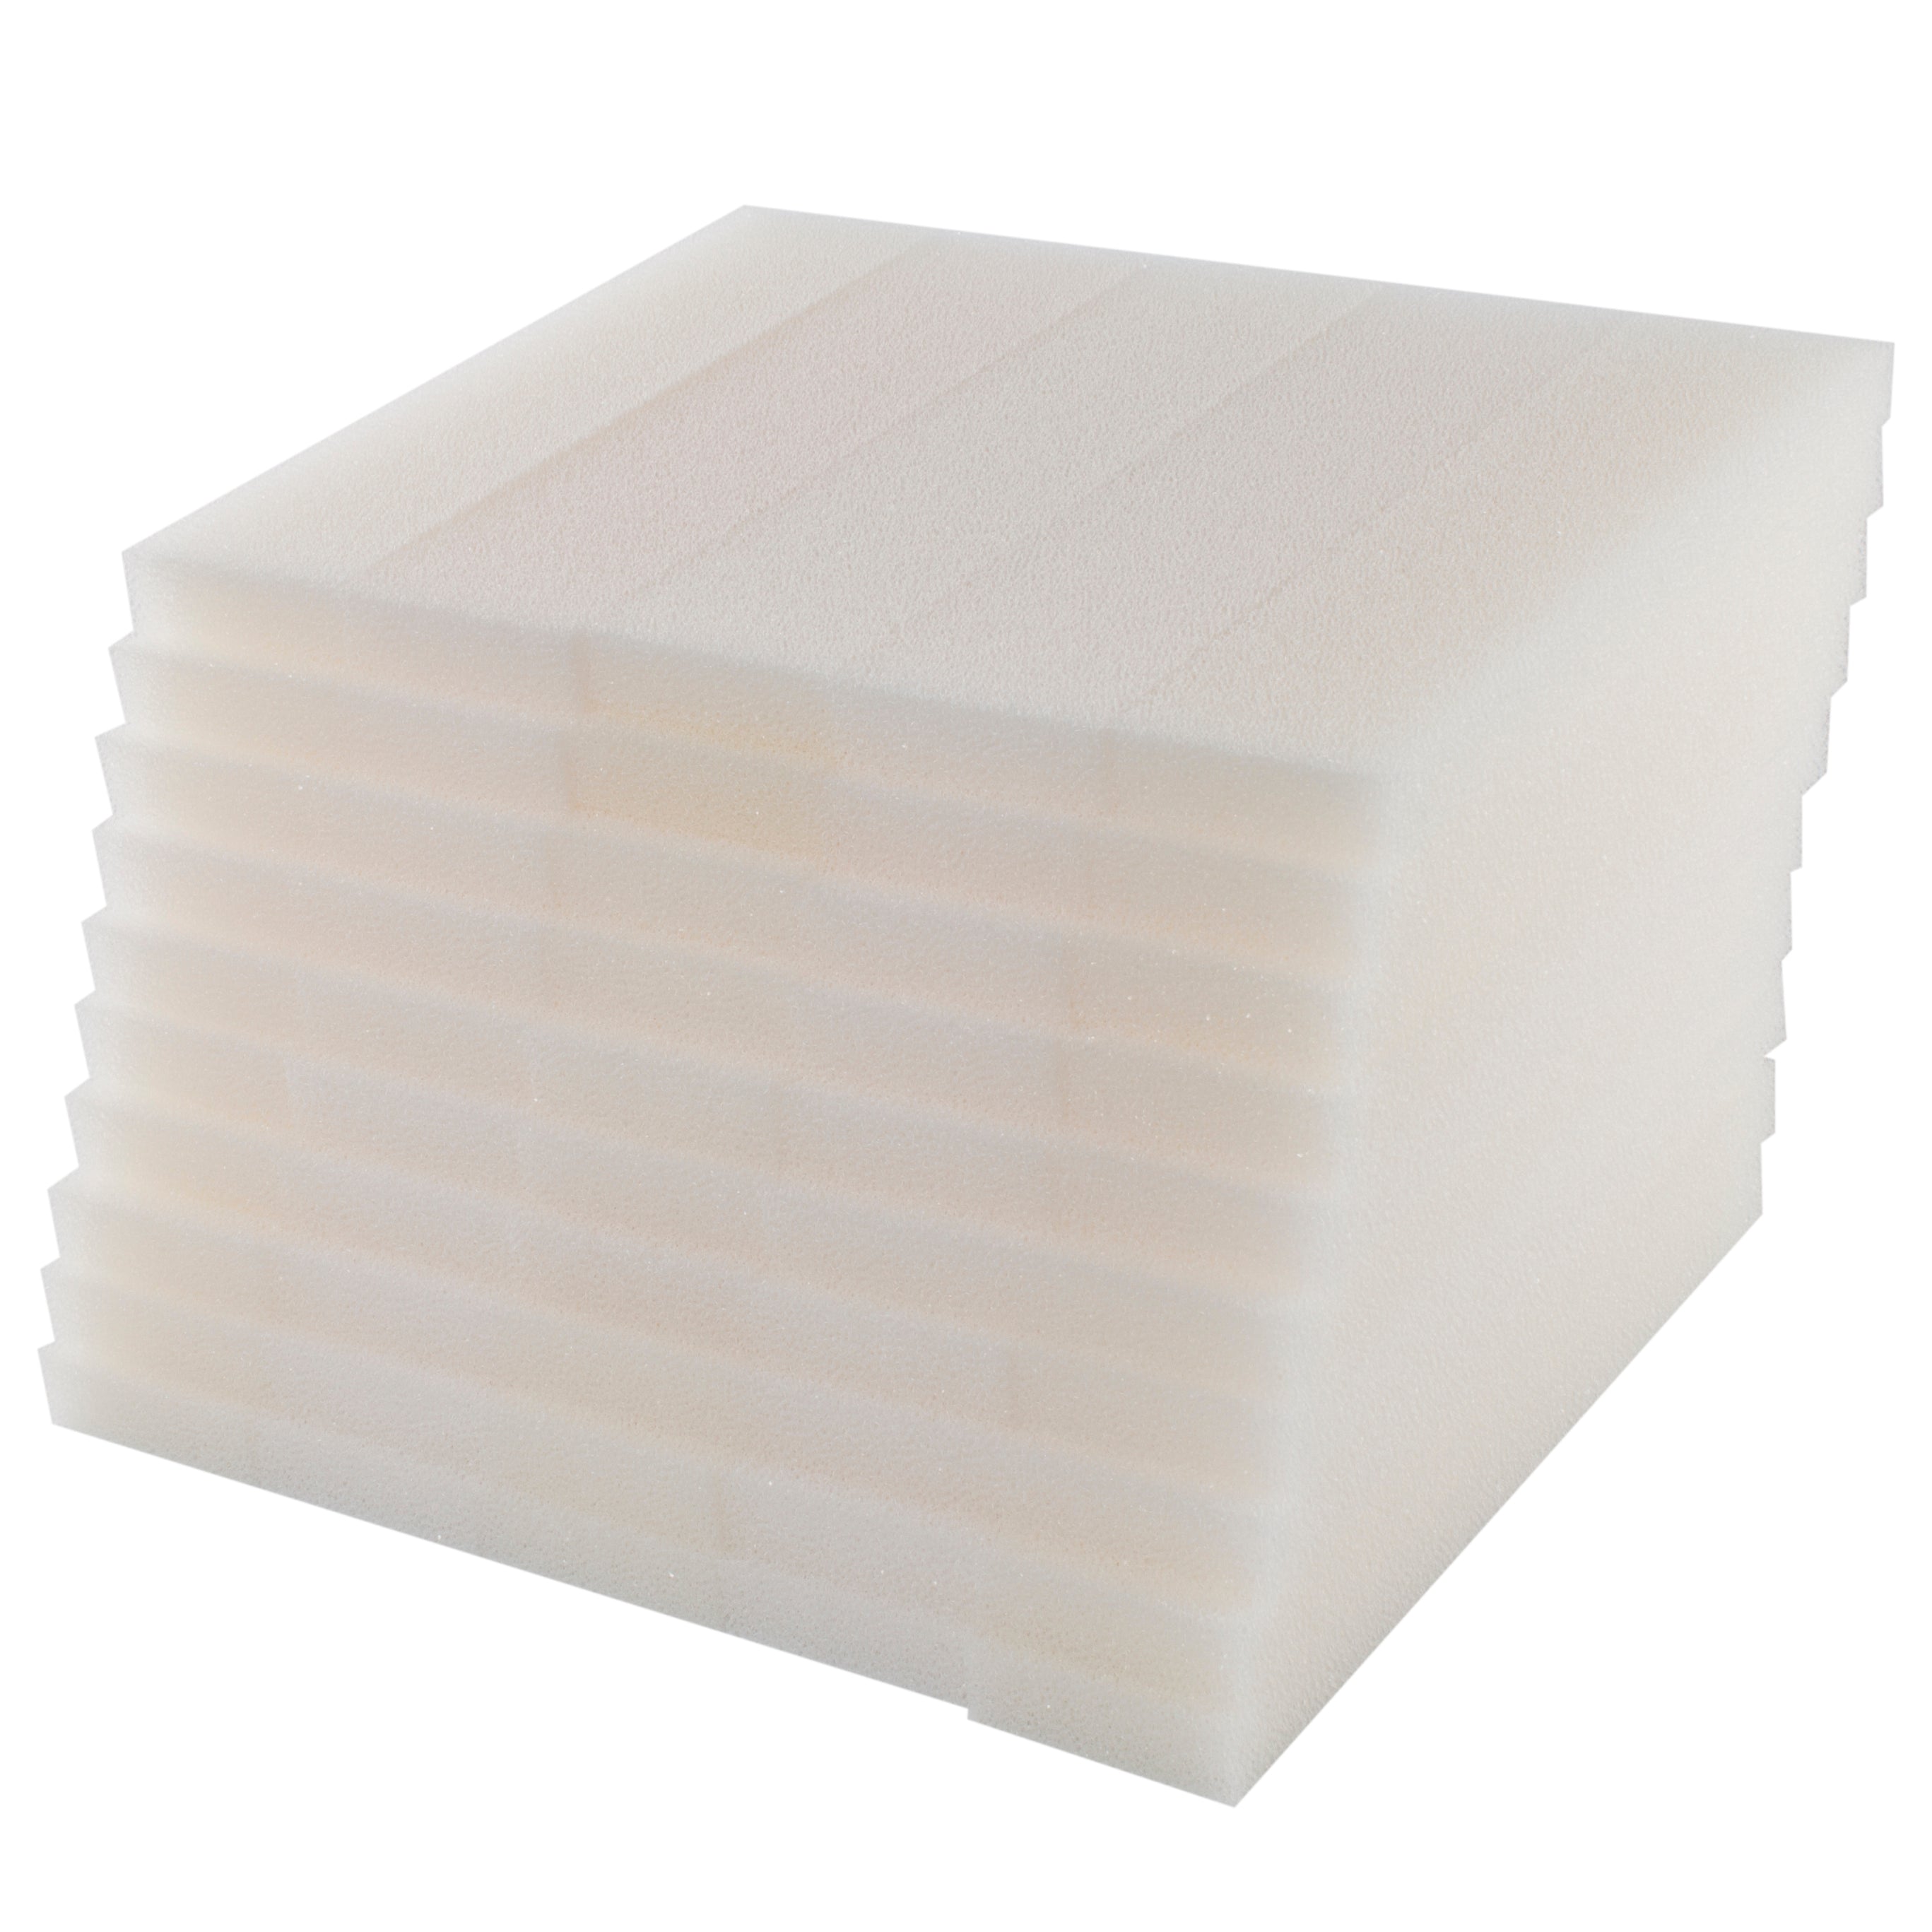 LTWHOME Foam Filter Pads Fit for Fluval 404, 405, 406 External Filter (Pack of 50)